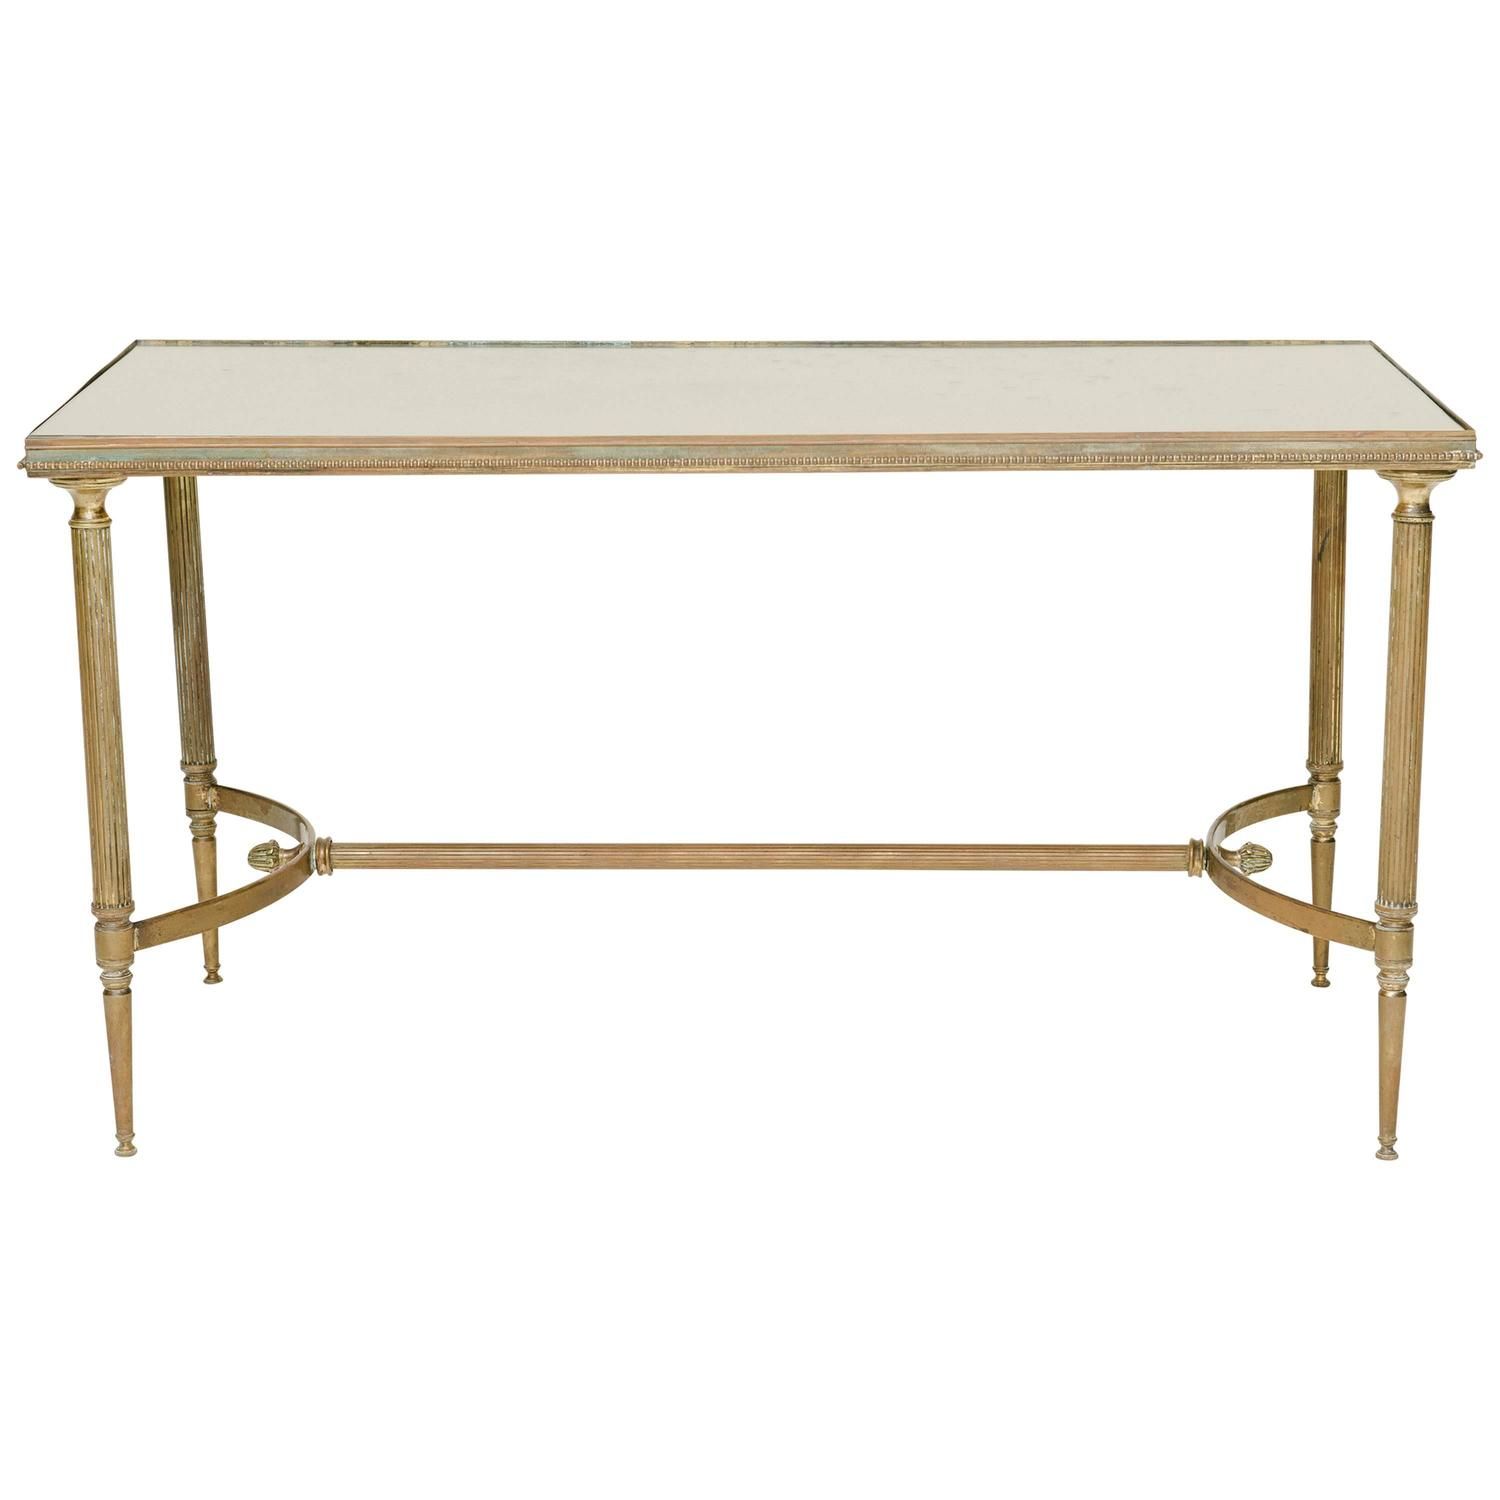 Vintage French Brass Cocktail Table For Sale At 1stdibs Pertaining To Antique Cocktail Tables (View 14 of 15)